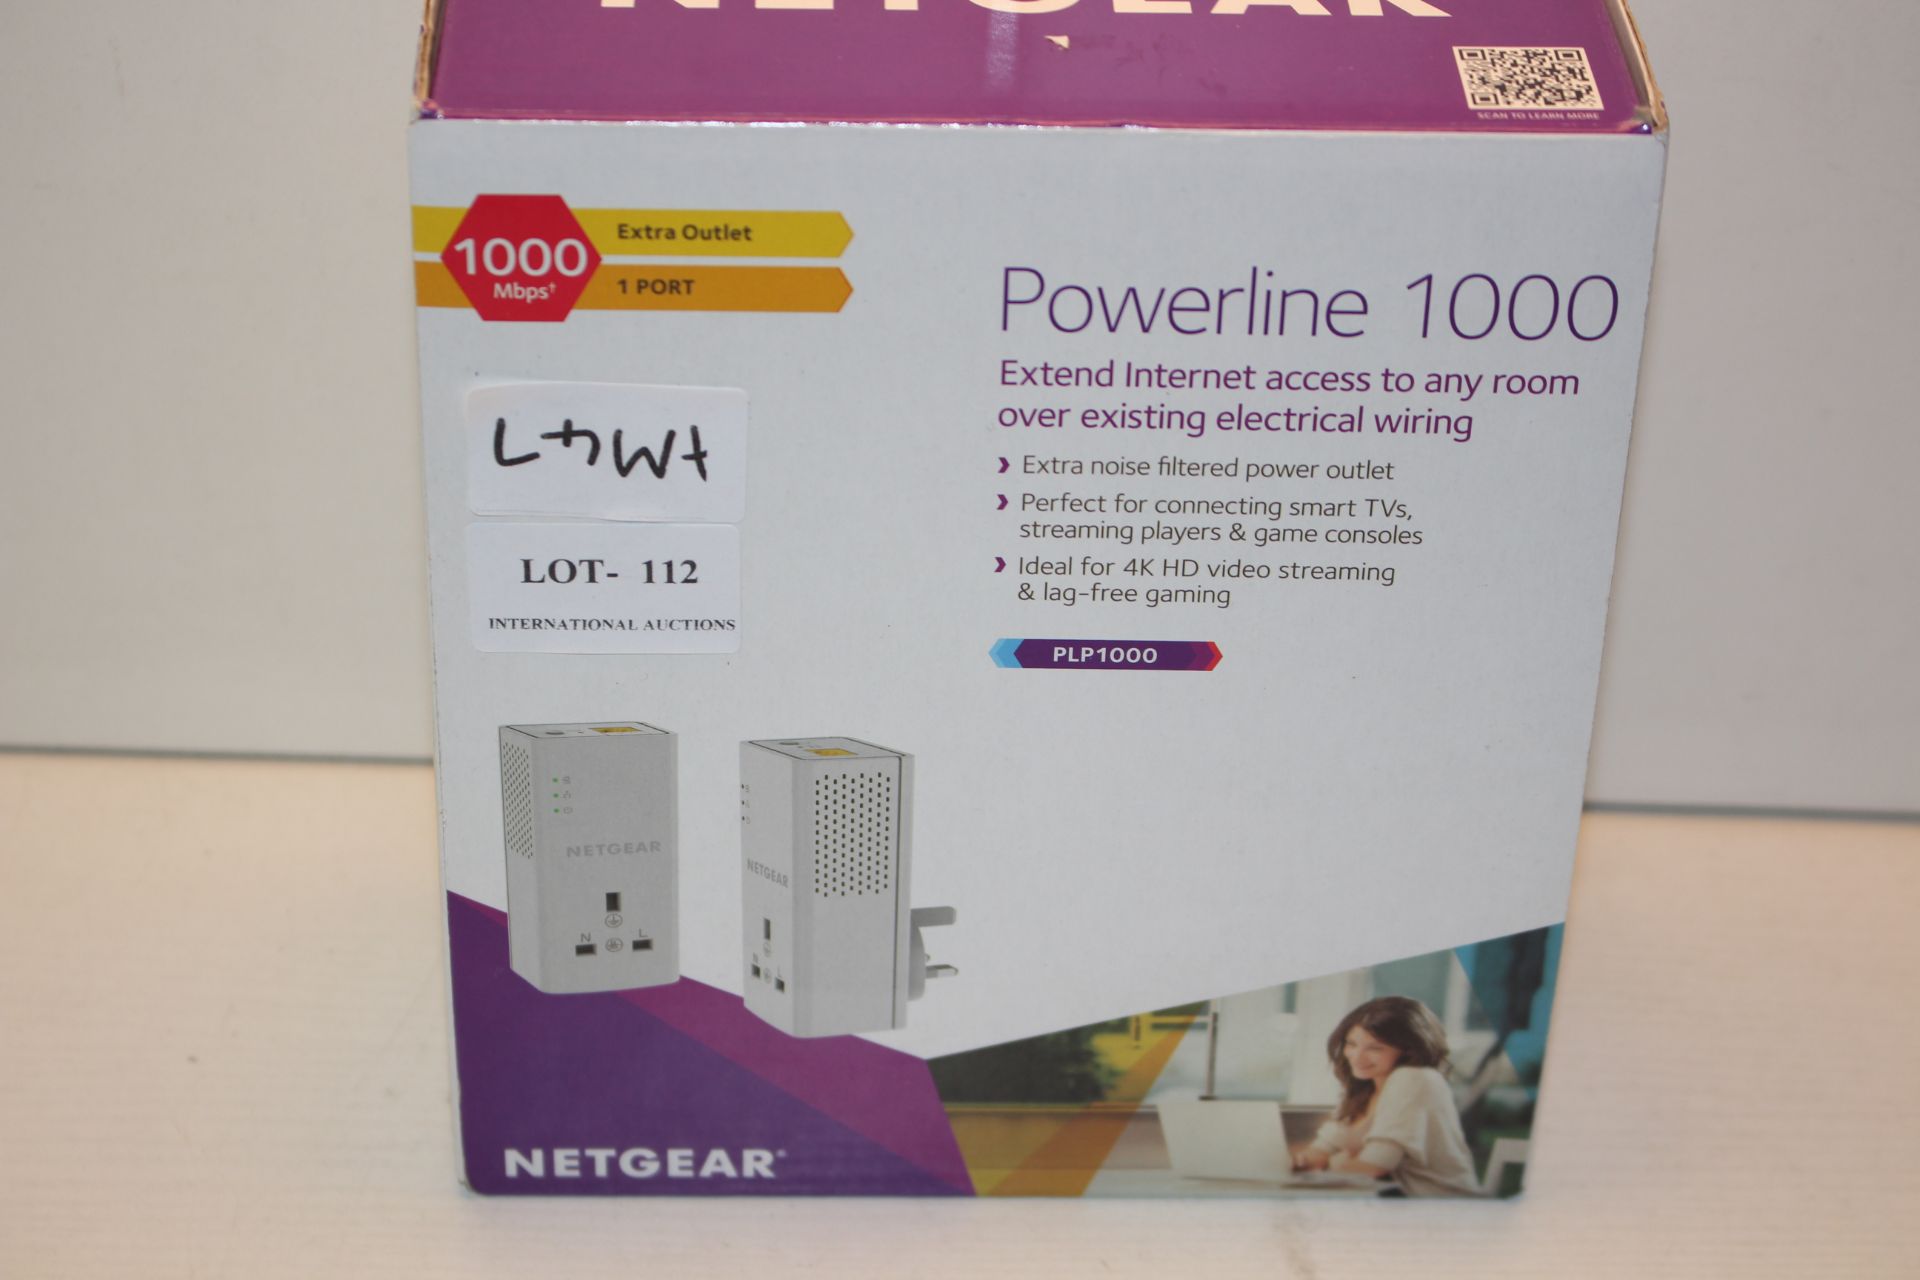 BOXED NETGEAR POWERLINE 1000 EXTEND INTERNET ACCESS 1000MBPSCondition ReportAppraisal Available on